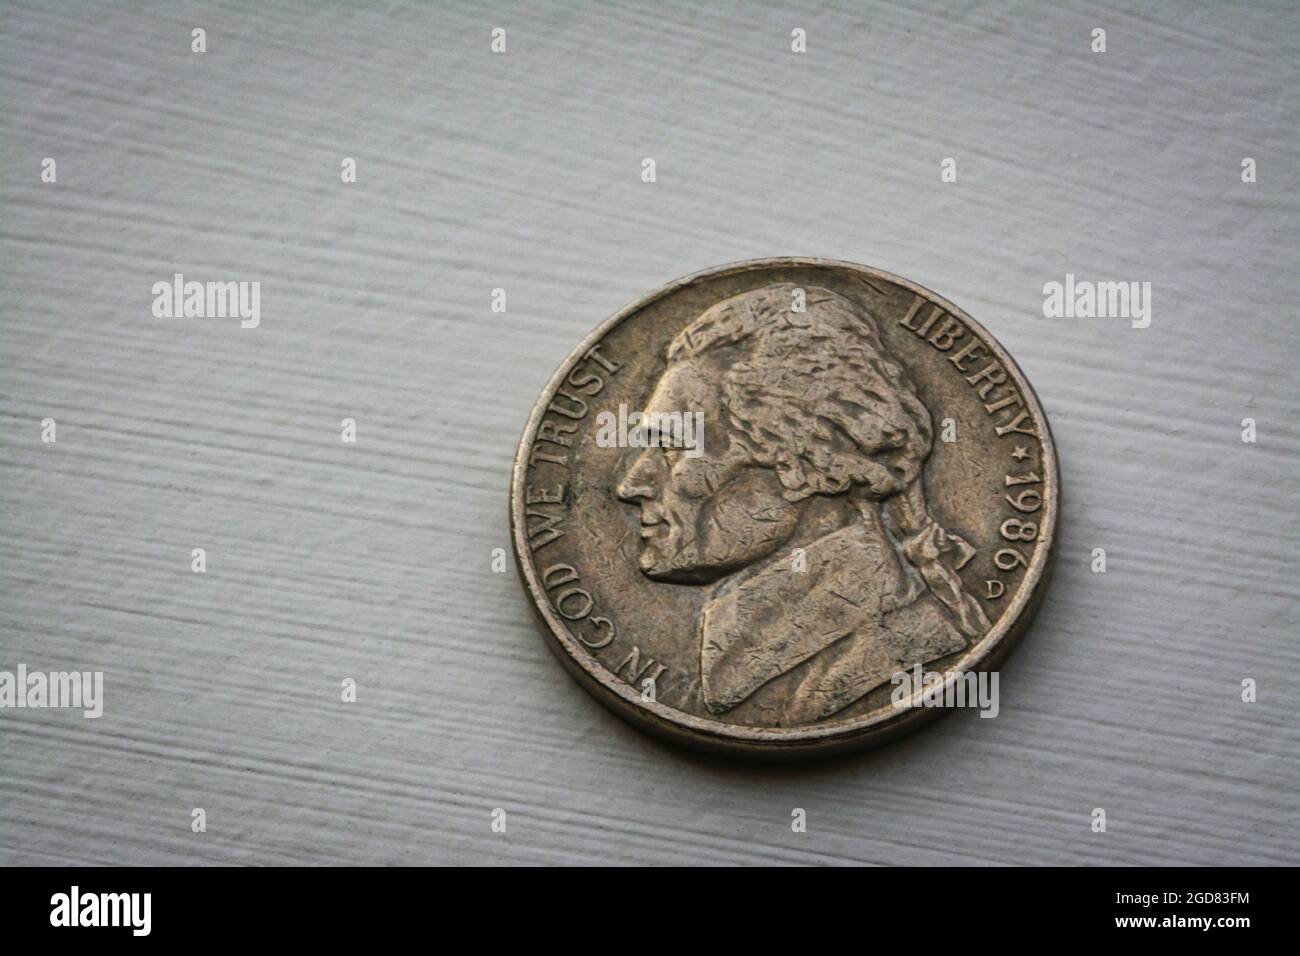 Macro image of scarred and dirty Thomas Jefferson US nickel coin, minted in Denver Colorado 1986, Castle Rock Colorado USA. Stock Photo